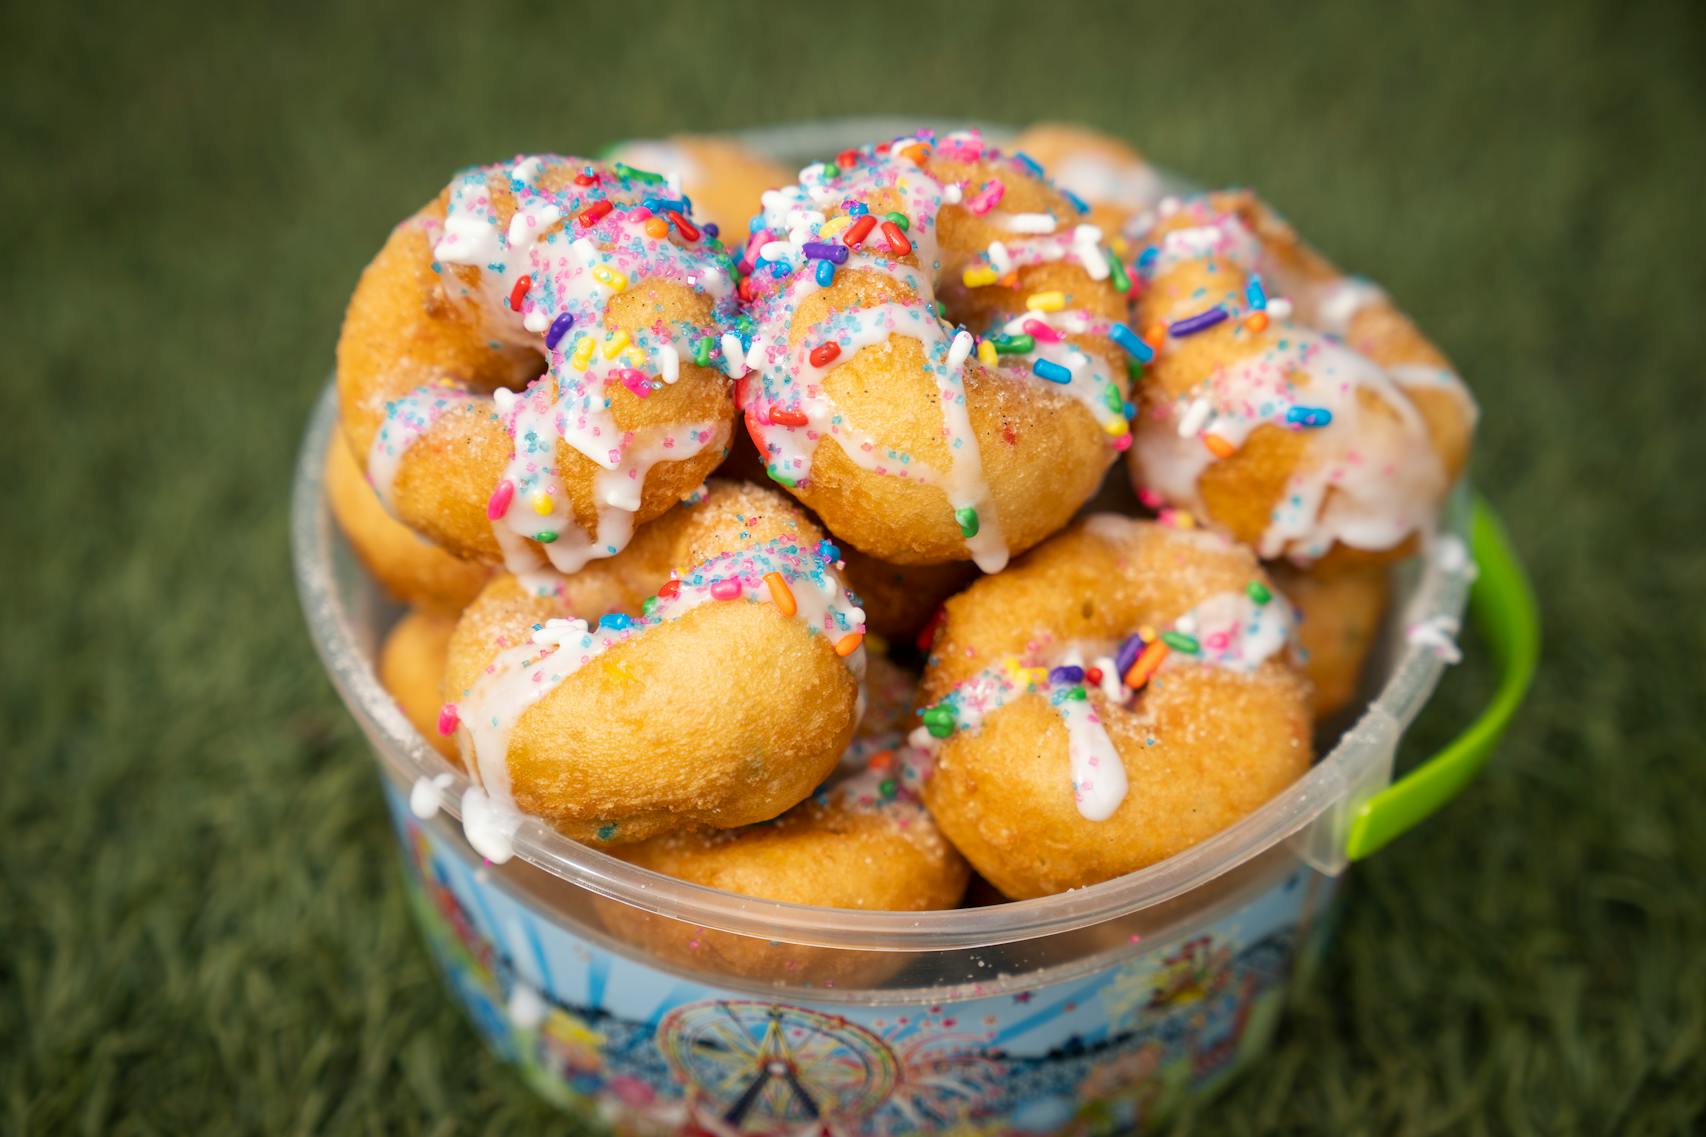 Birthday Cake Mini Donuts from Mini Donuts & Cheese Curds. The new foods of the 2023 Minnesota State Fair photographed on the first day of the fair in Falcon Heights, Minn. on Tuesday, Aug. 8, 2023. ] LEILA NAVIDI • leila.navidi@startribune.com